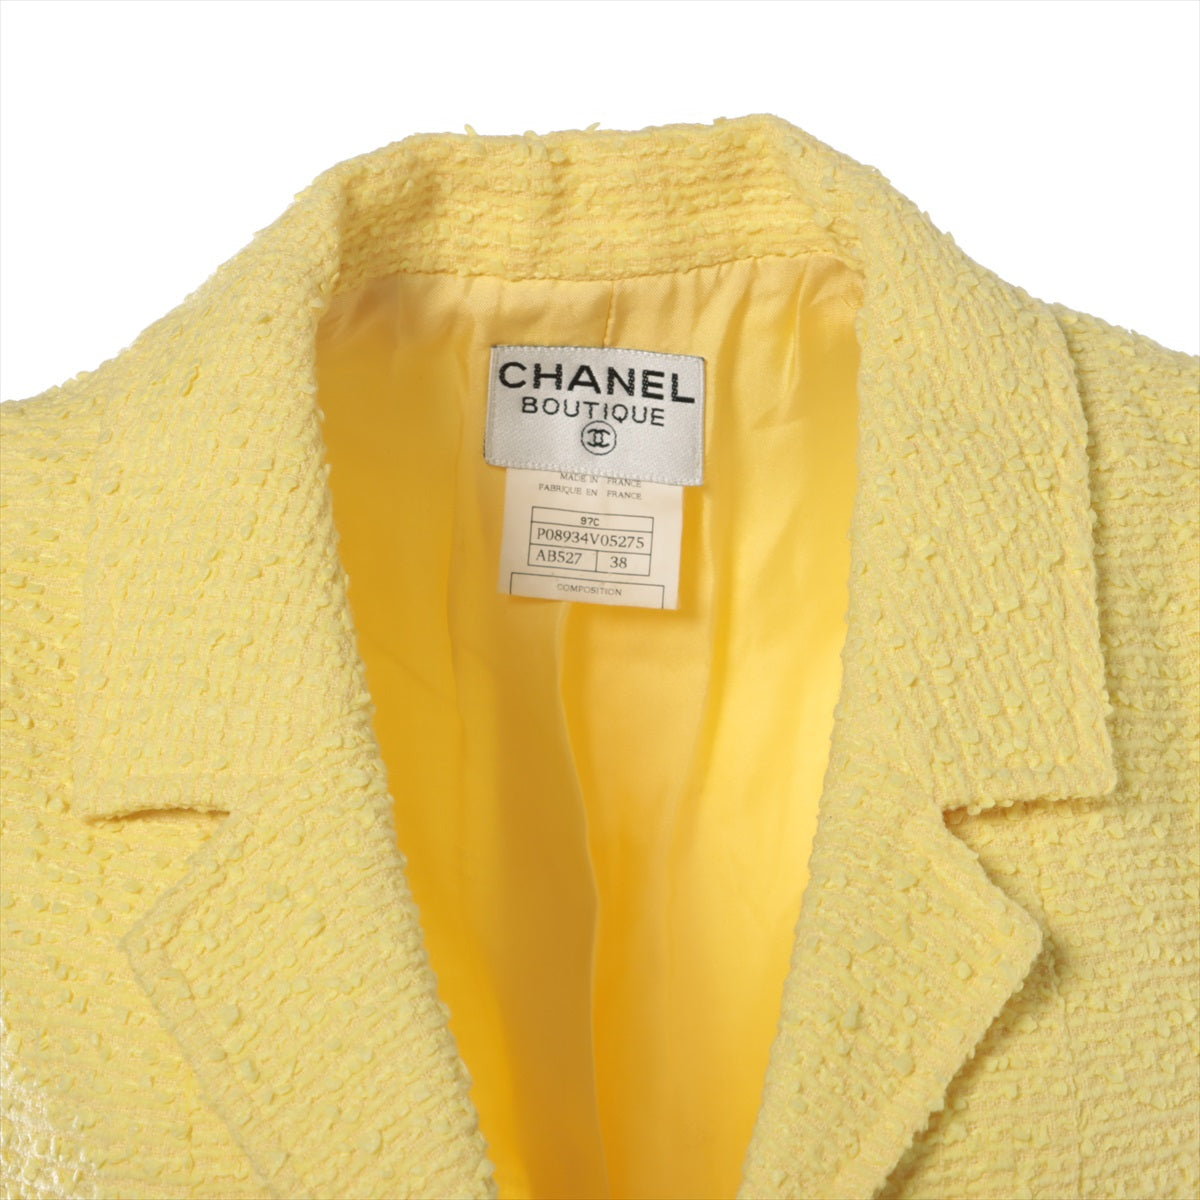 Chanel Coconut Button 97C Twid Best 38  Yellow P08934V05275